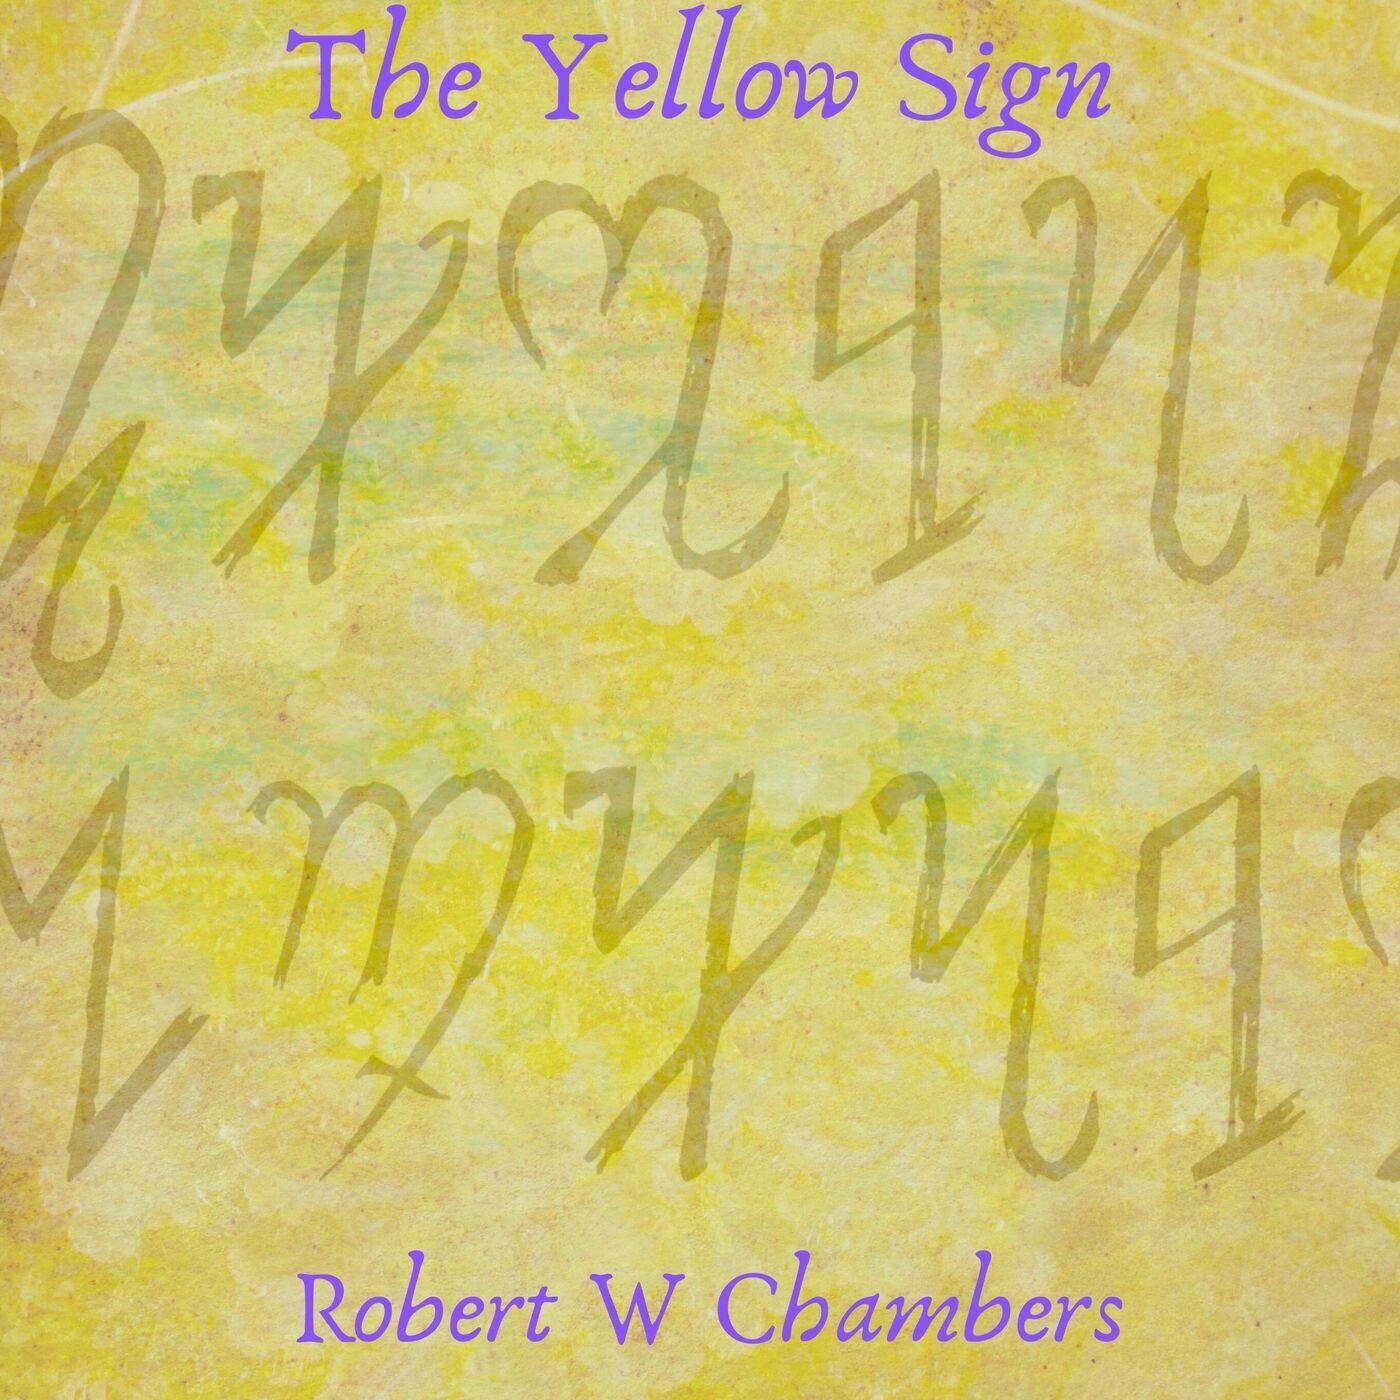 Episode 32: The Yellow Sign by Robert W. Chambers